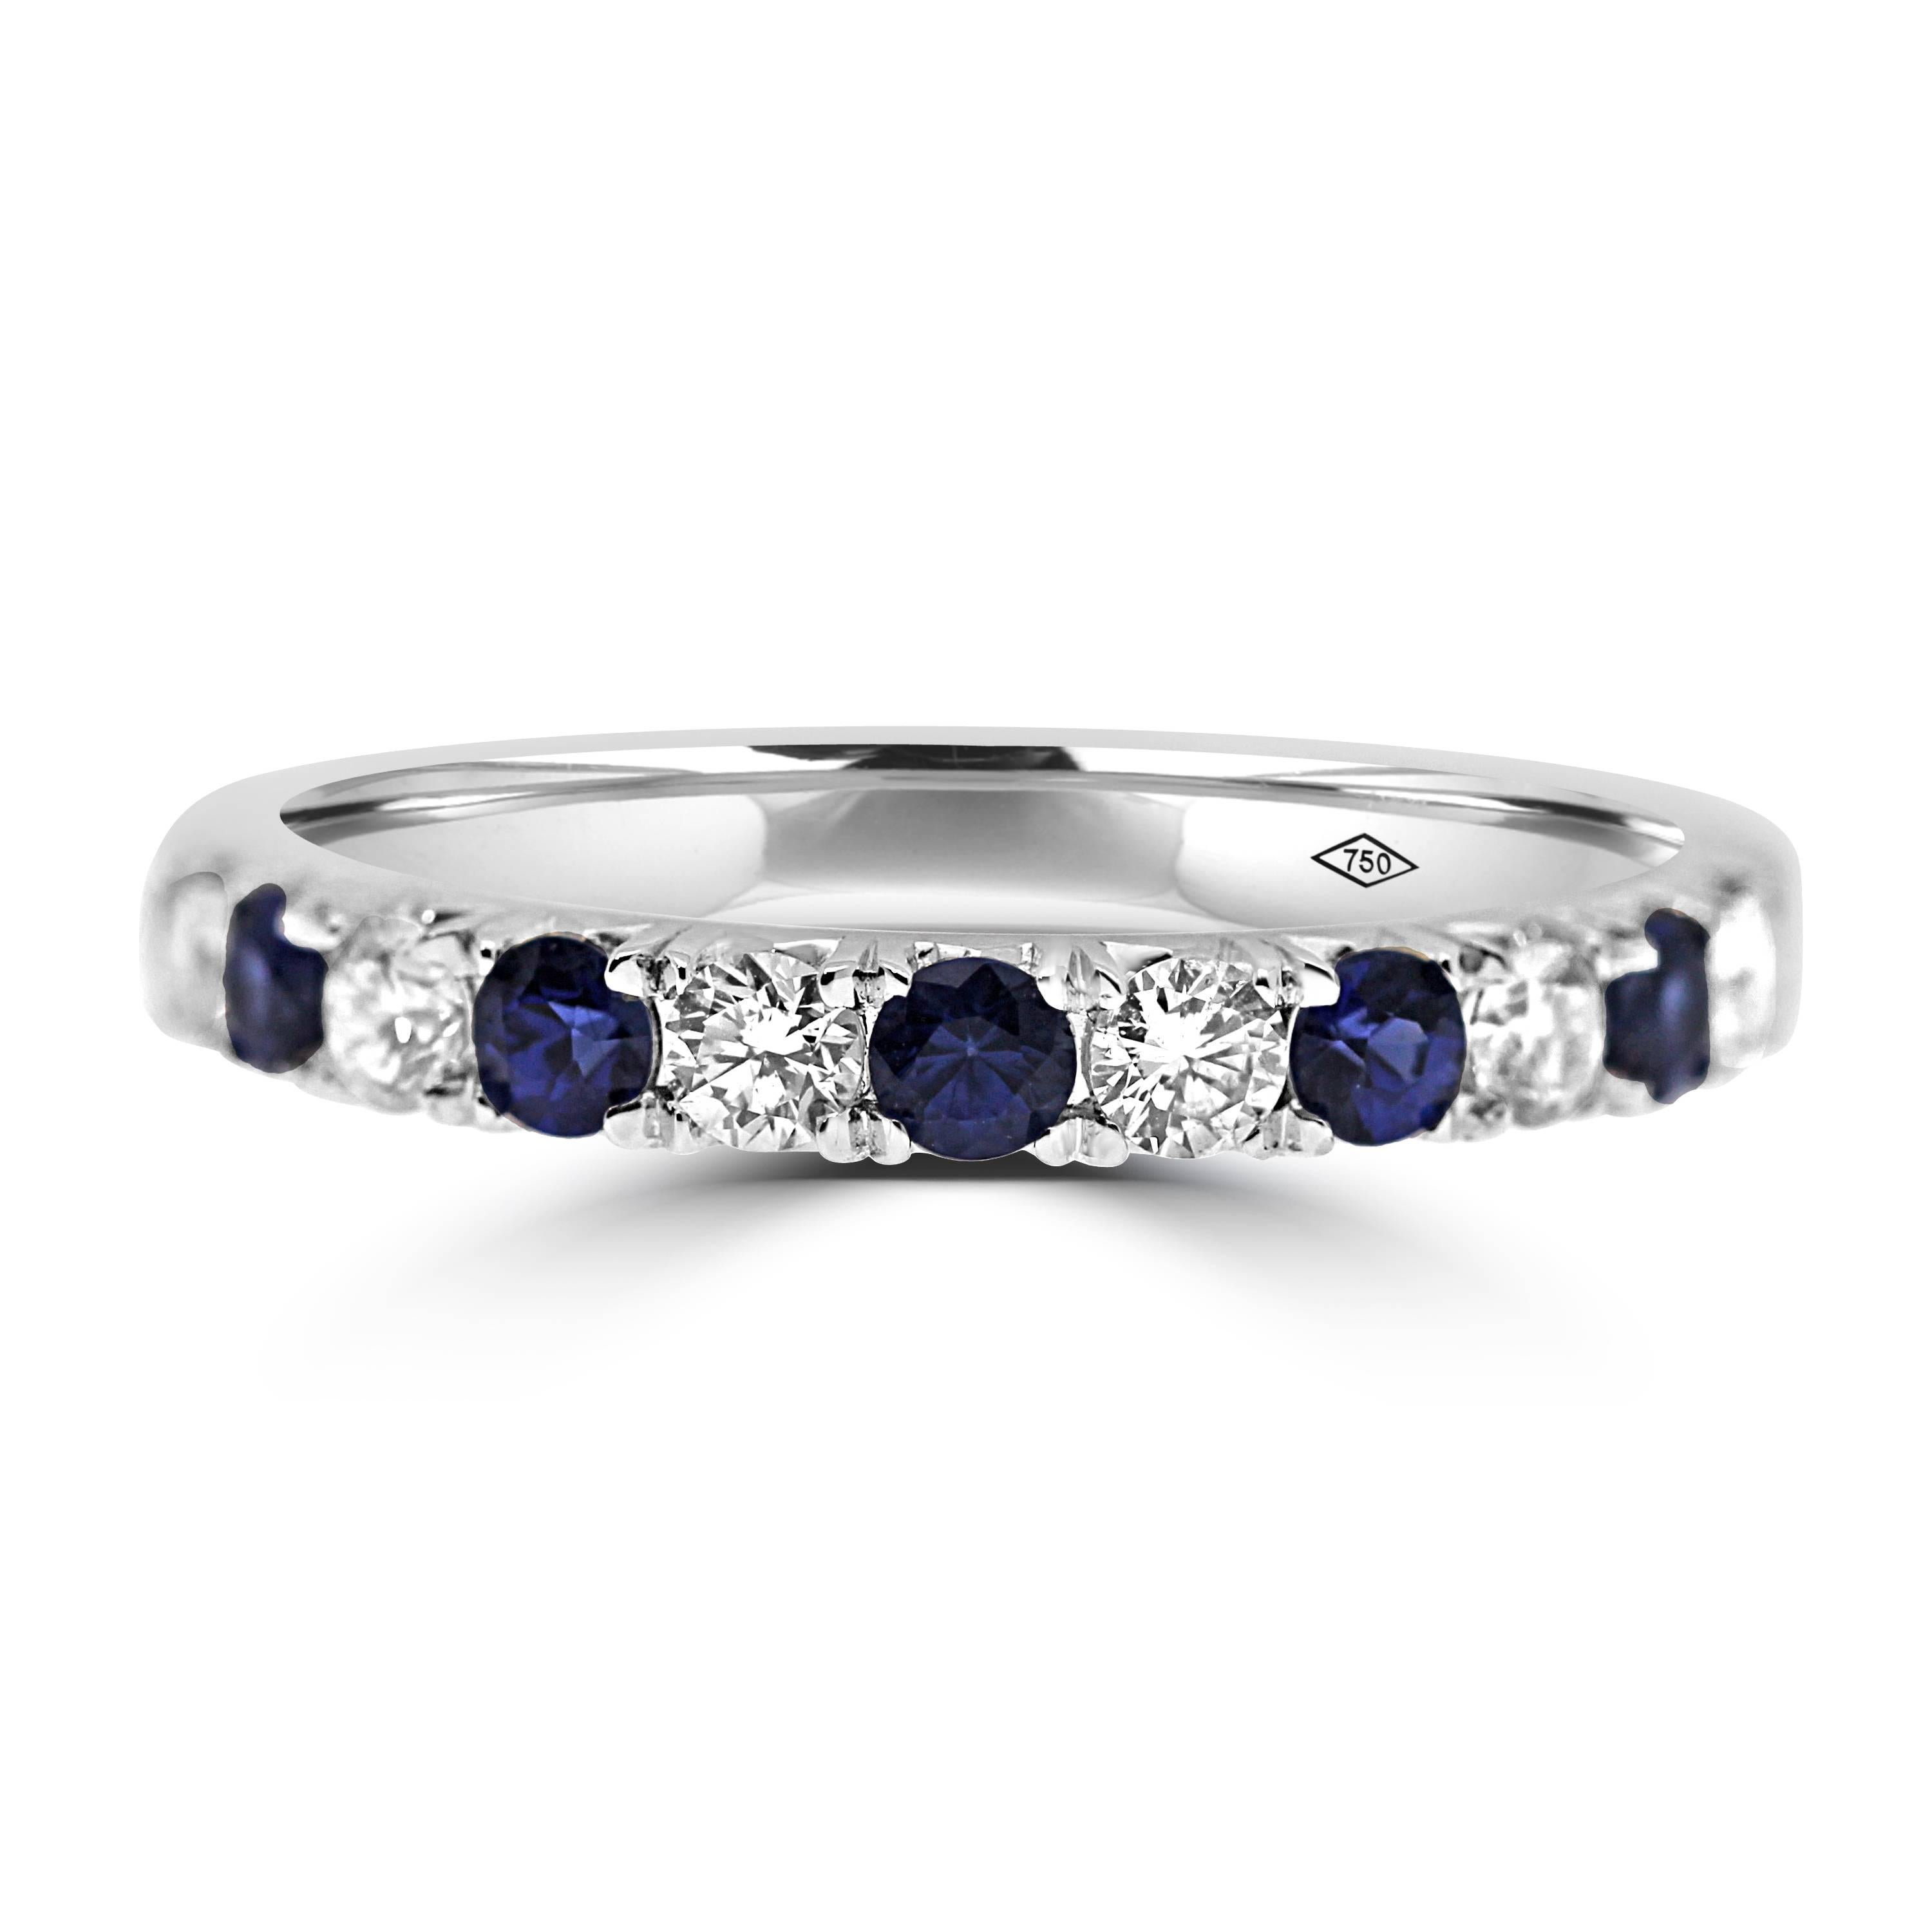 elegant and classy eternity band,
half set with brilliant cut diamonds of 0.45ct total and blue sapphire gemstones of 0.47ct total, mounted in 18kt white gold.
Winston special setting.

 